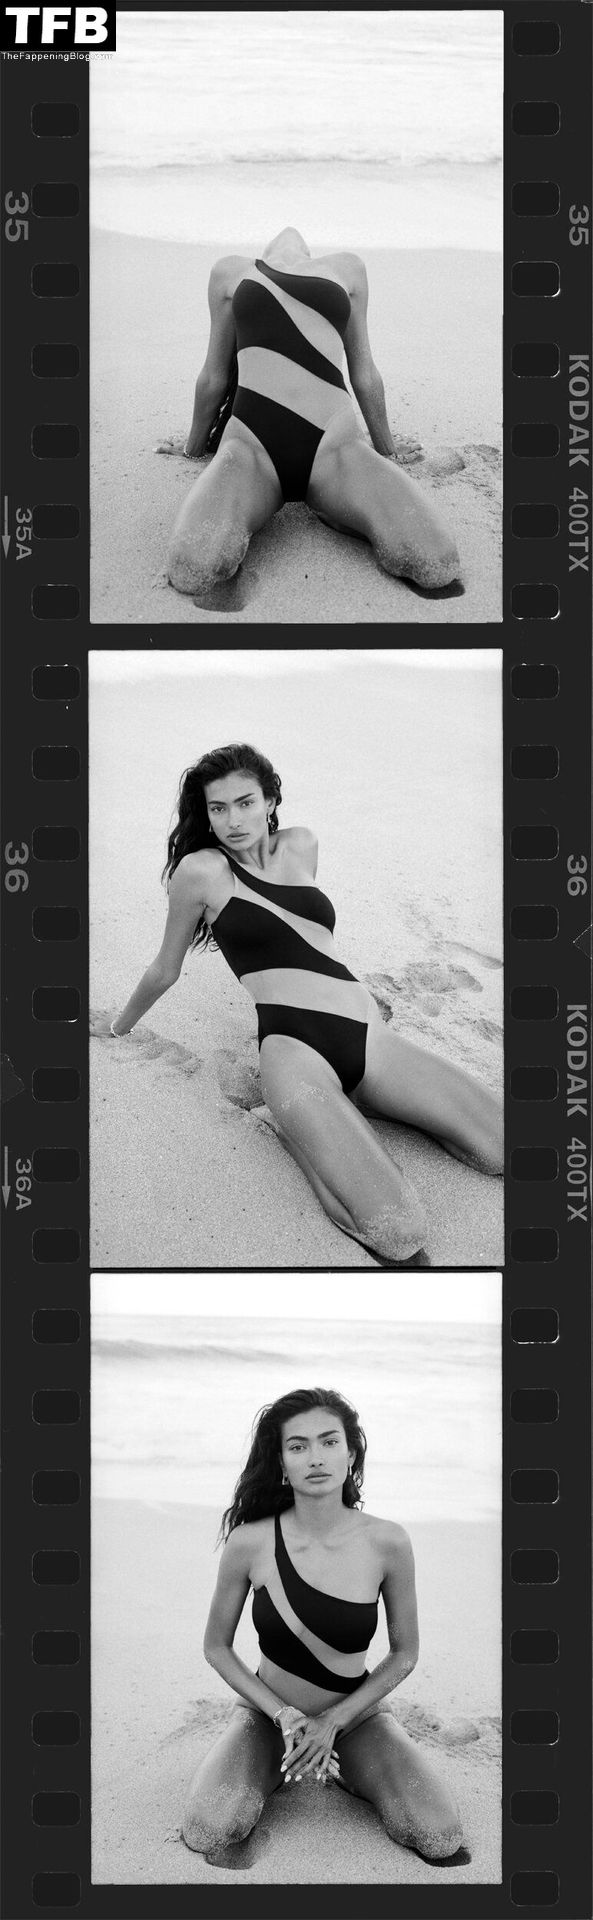 Kelly Gale Looks Beautiful as She Poses Topless in a New Shoot by Sam Crawford (8 Photos)